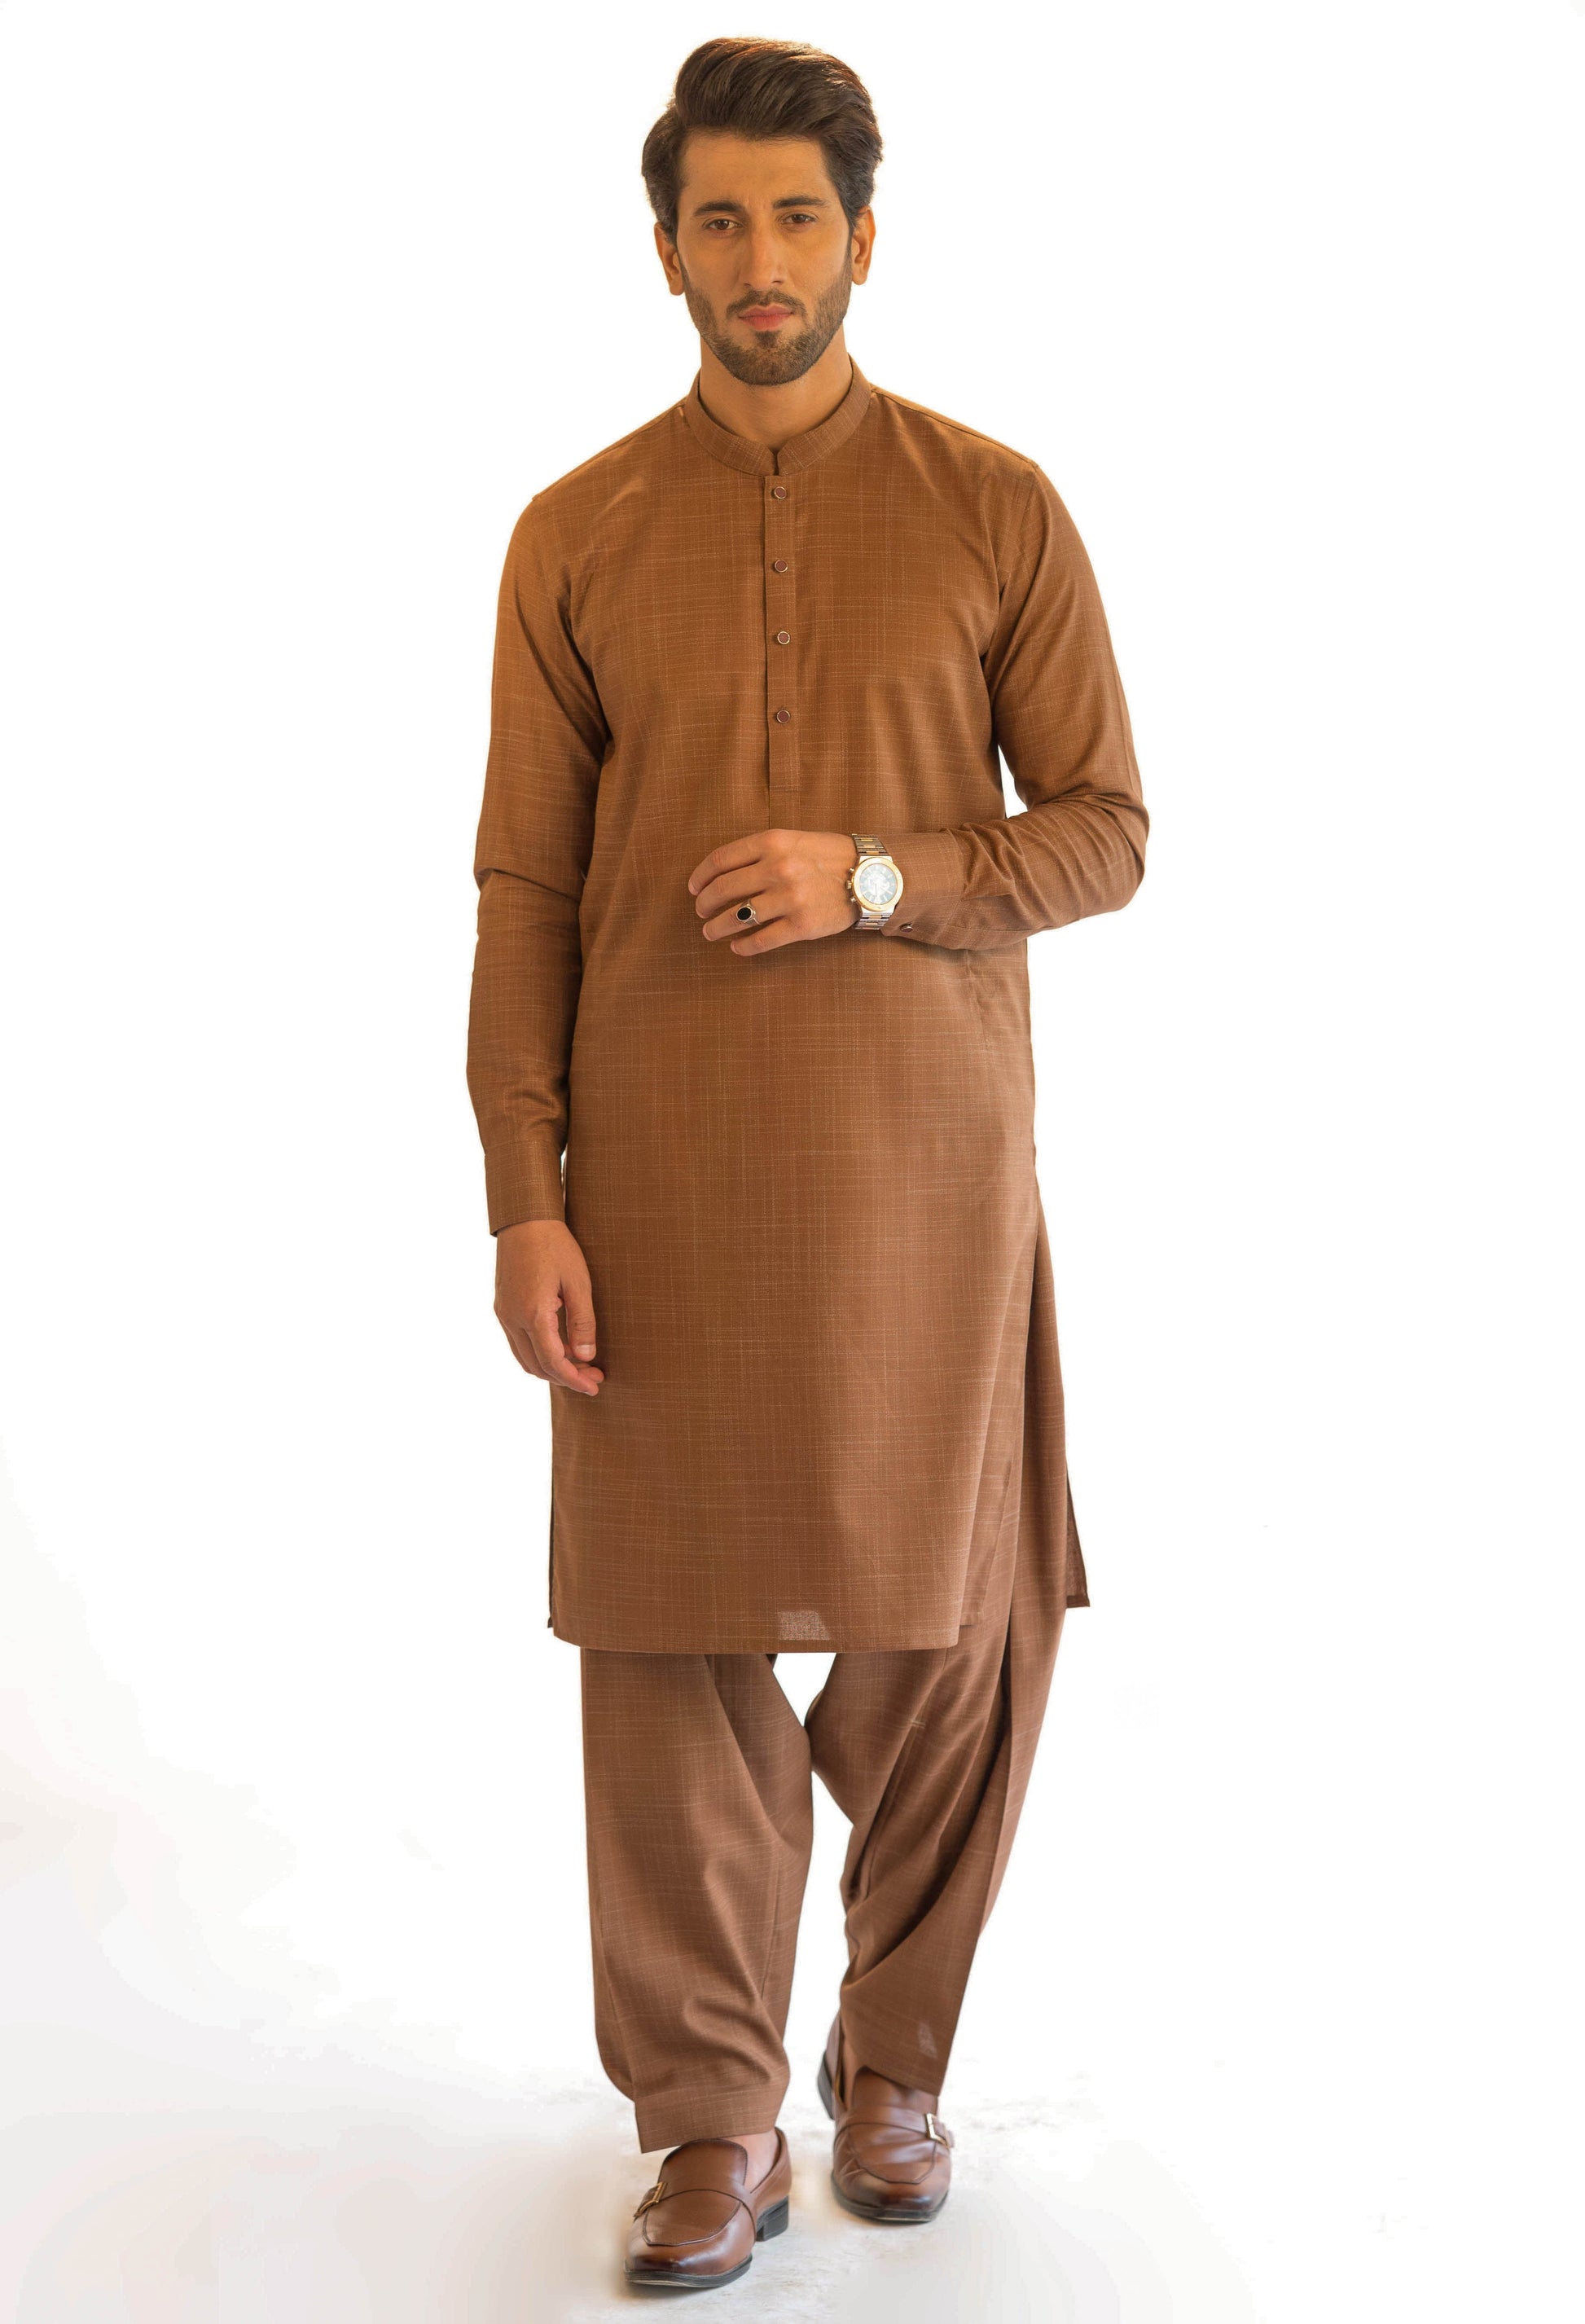 Discover Tradition and Contemporary Flair in Our Shalwar Kameez Mens Collection - Short Sherwani, Royal White Sherwani, and More